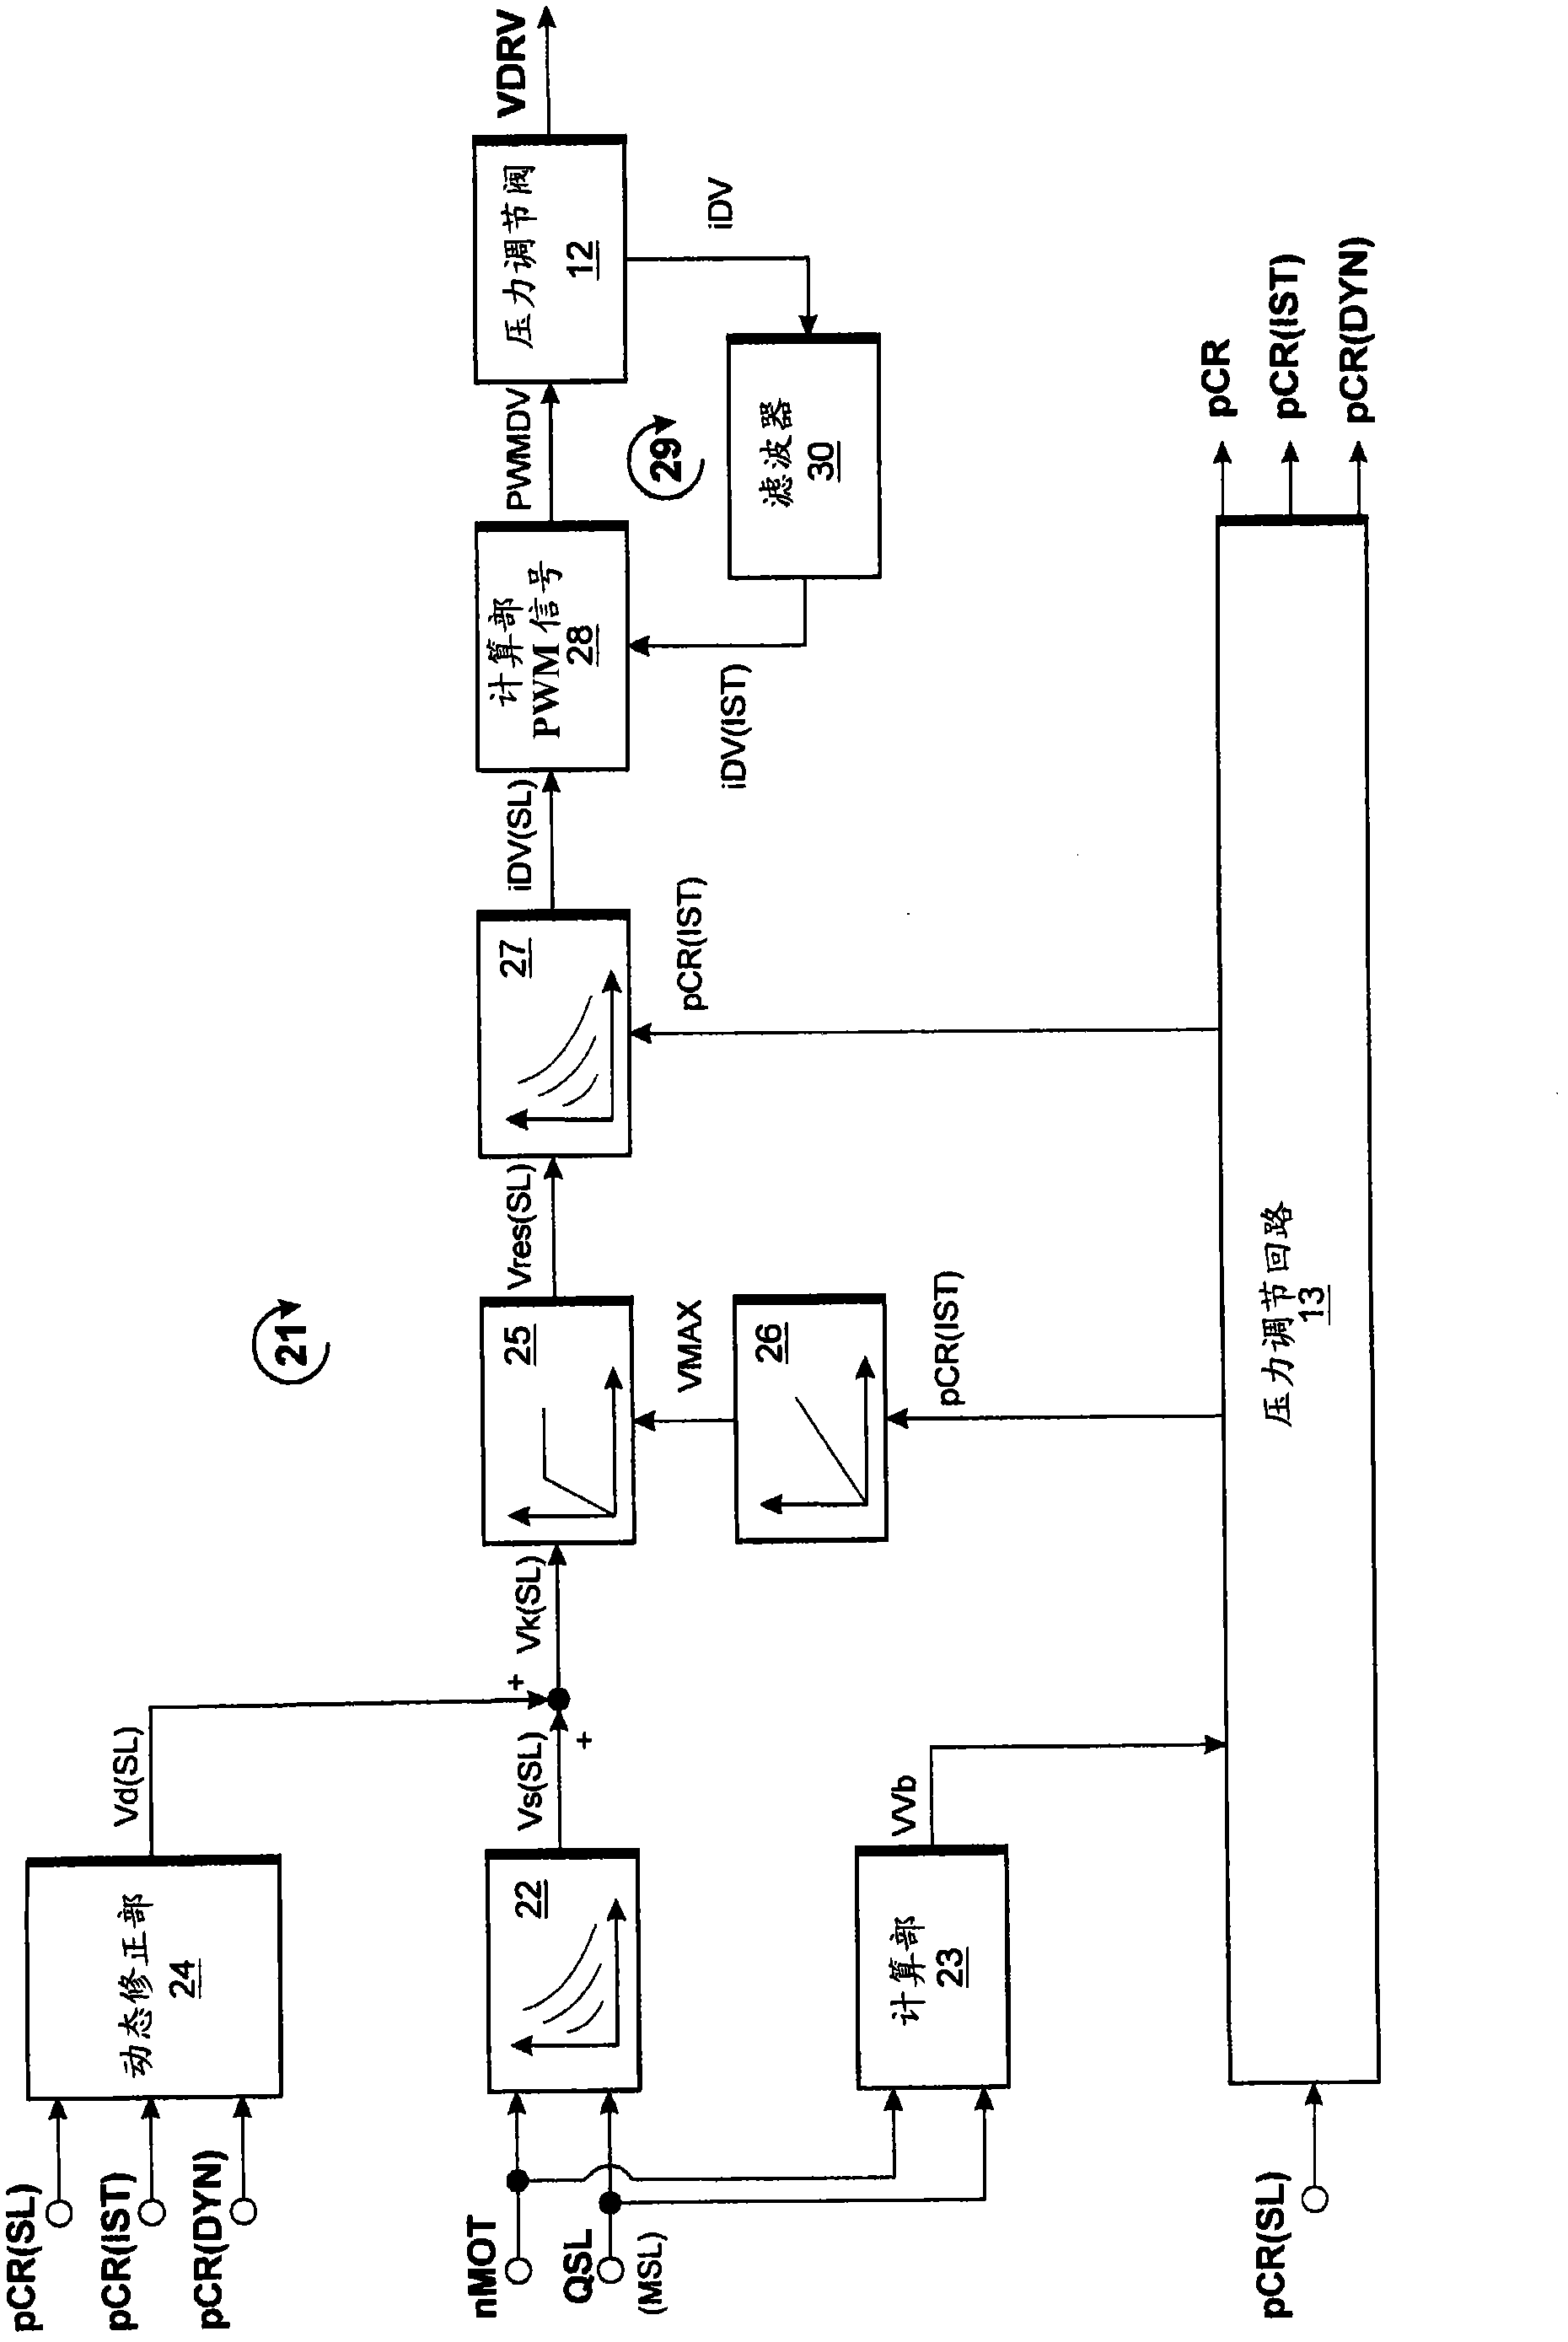 Method for controlling and regulating the fuel pressure in the common rail of an internal combustion engine